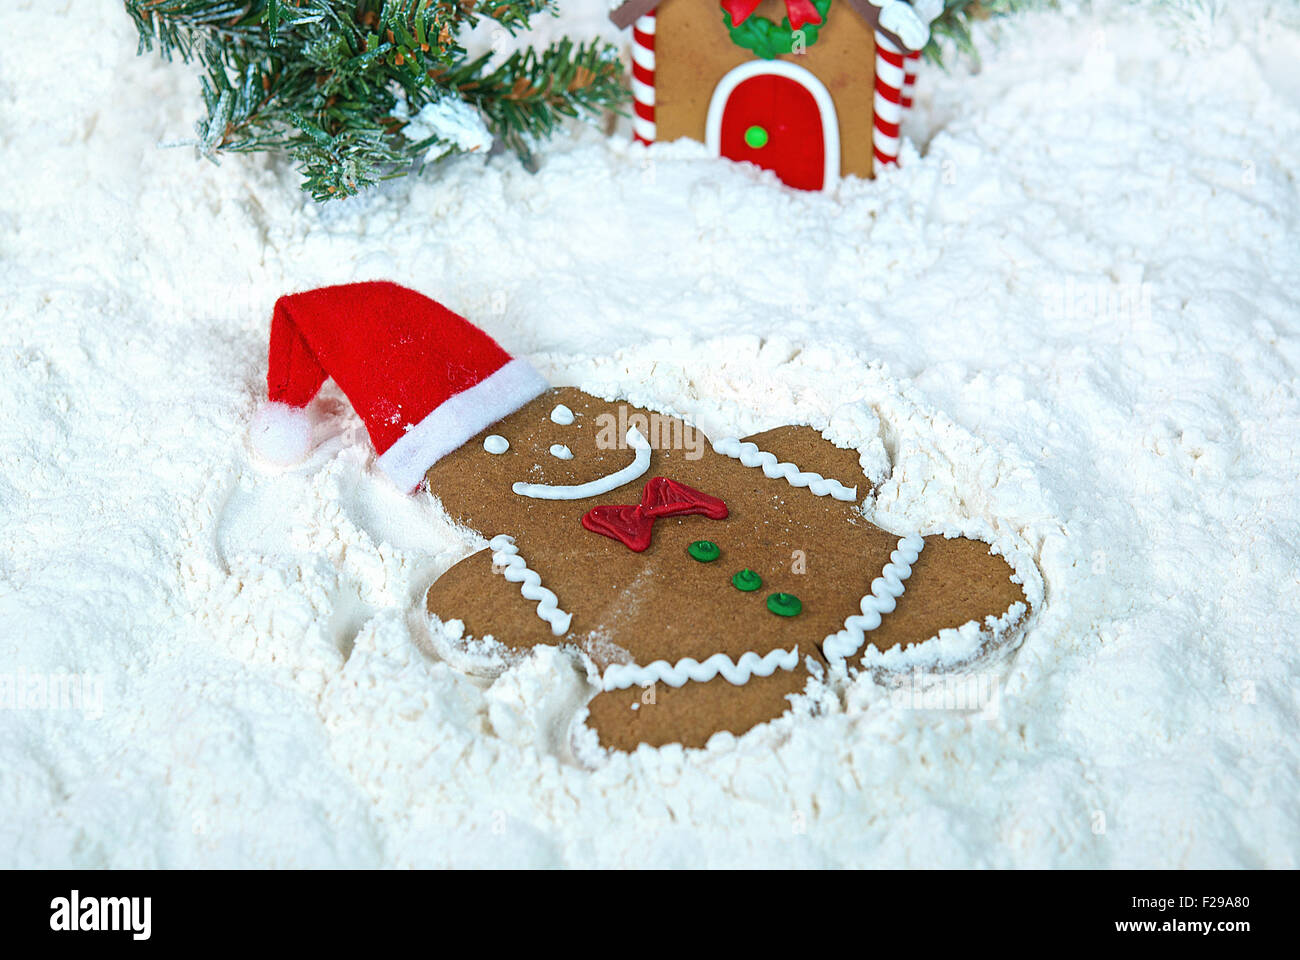 Christmas gingerbread man making an angel in white flour. Stock Photo